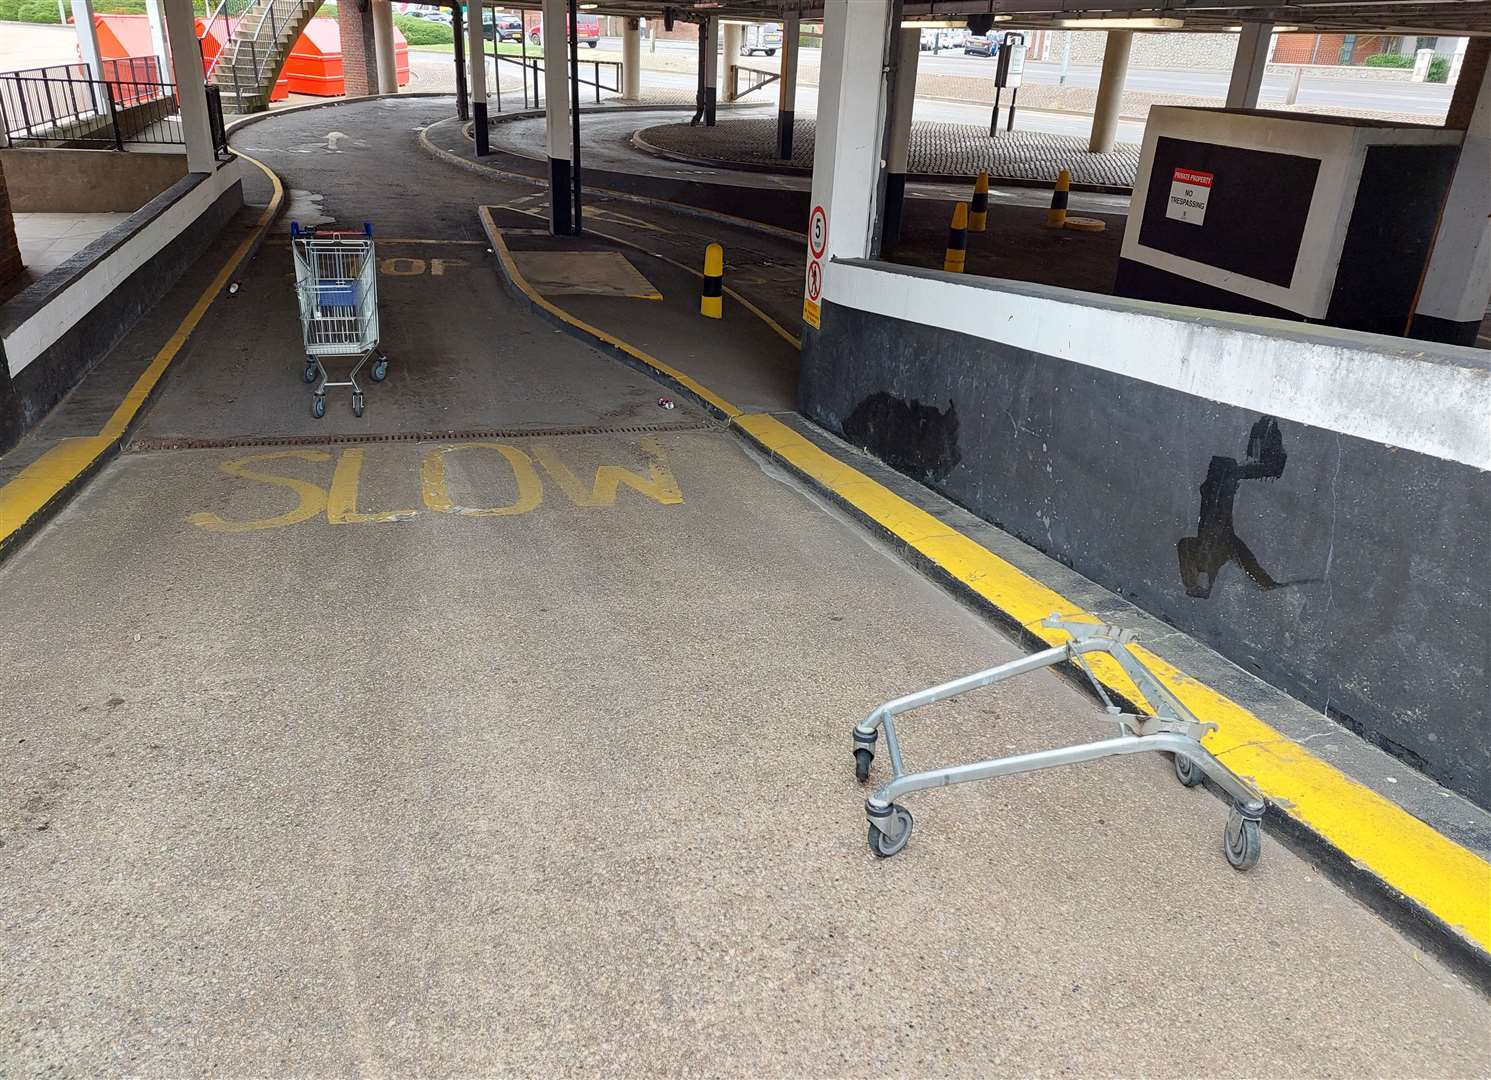 Abandoned trollies on the exit ramp